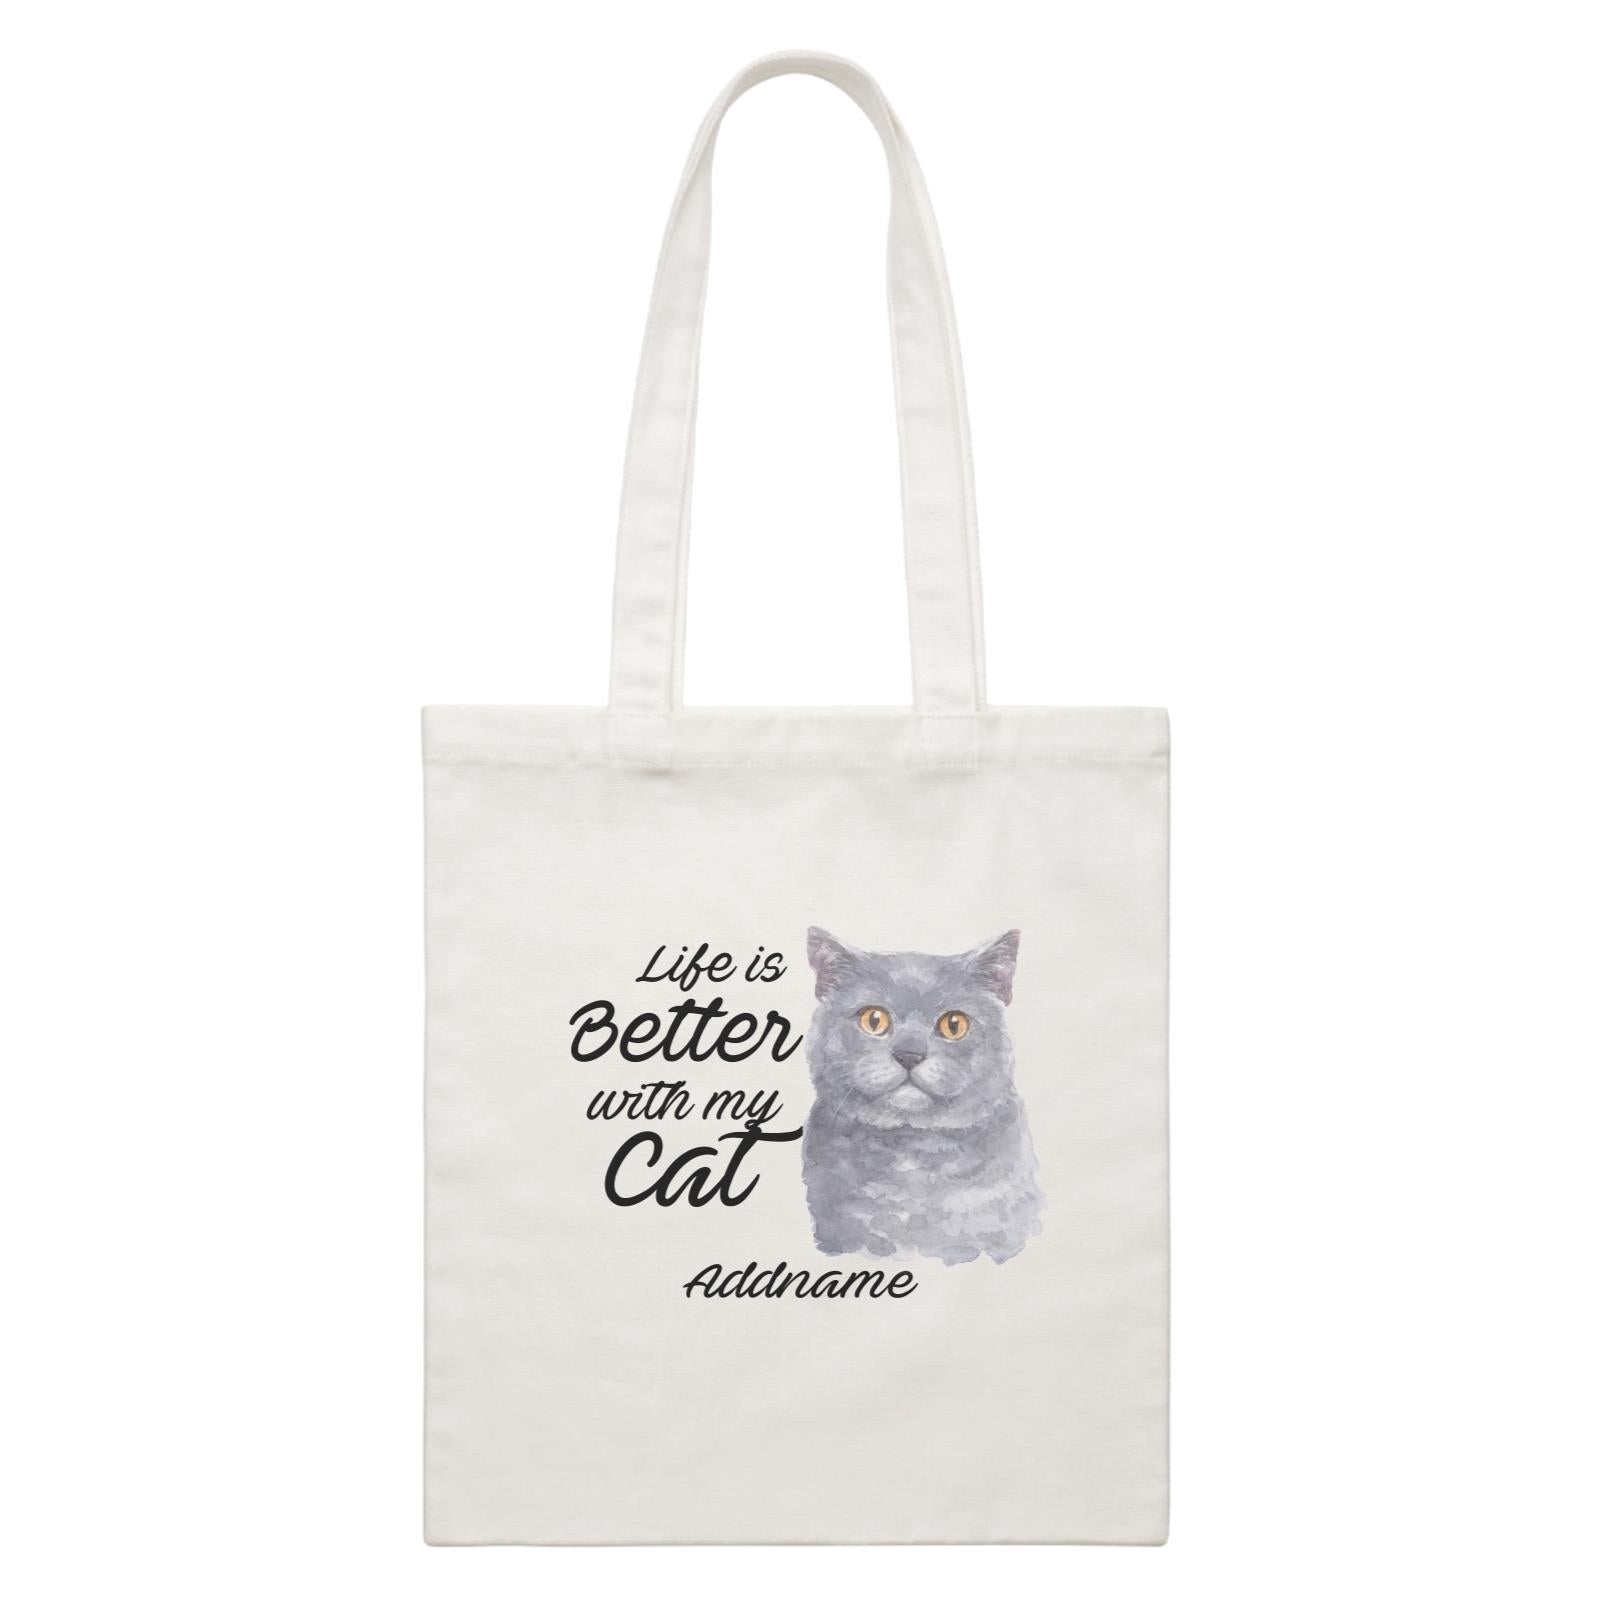 Watercolor Life is Better With My Cat British Shorthair Grey Addname White Canvas Bag